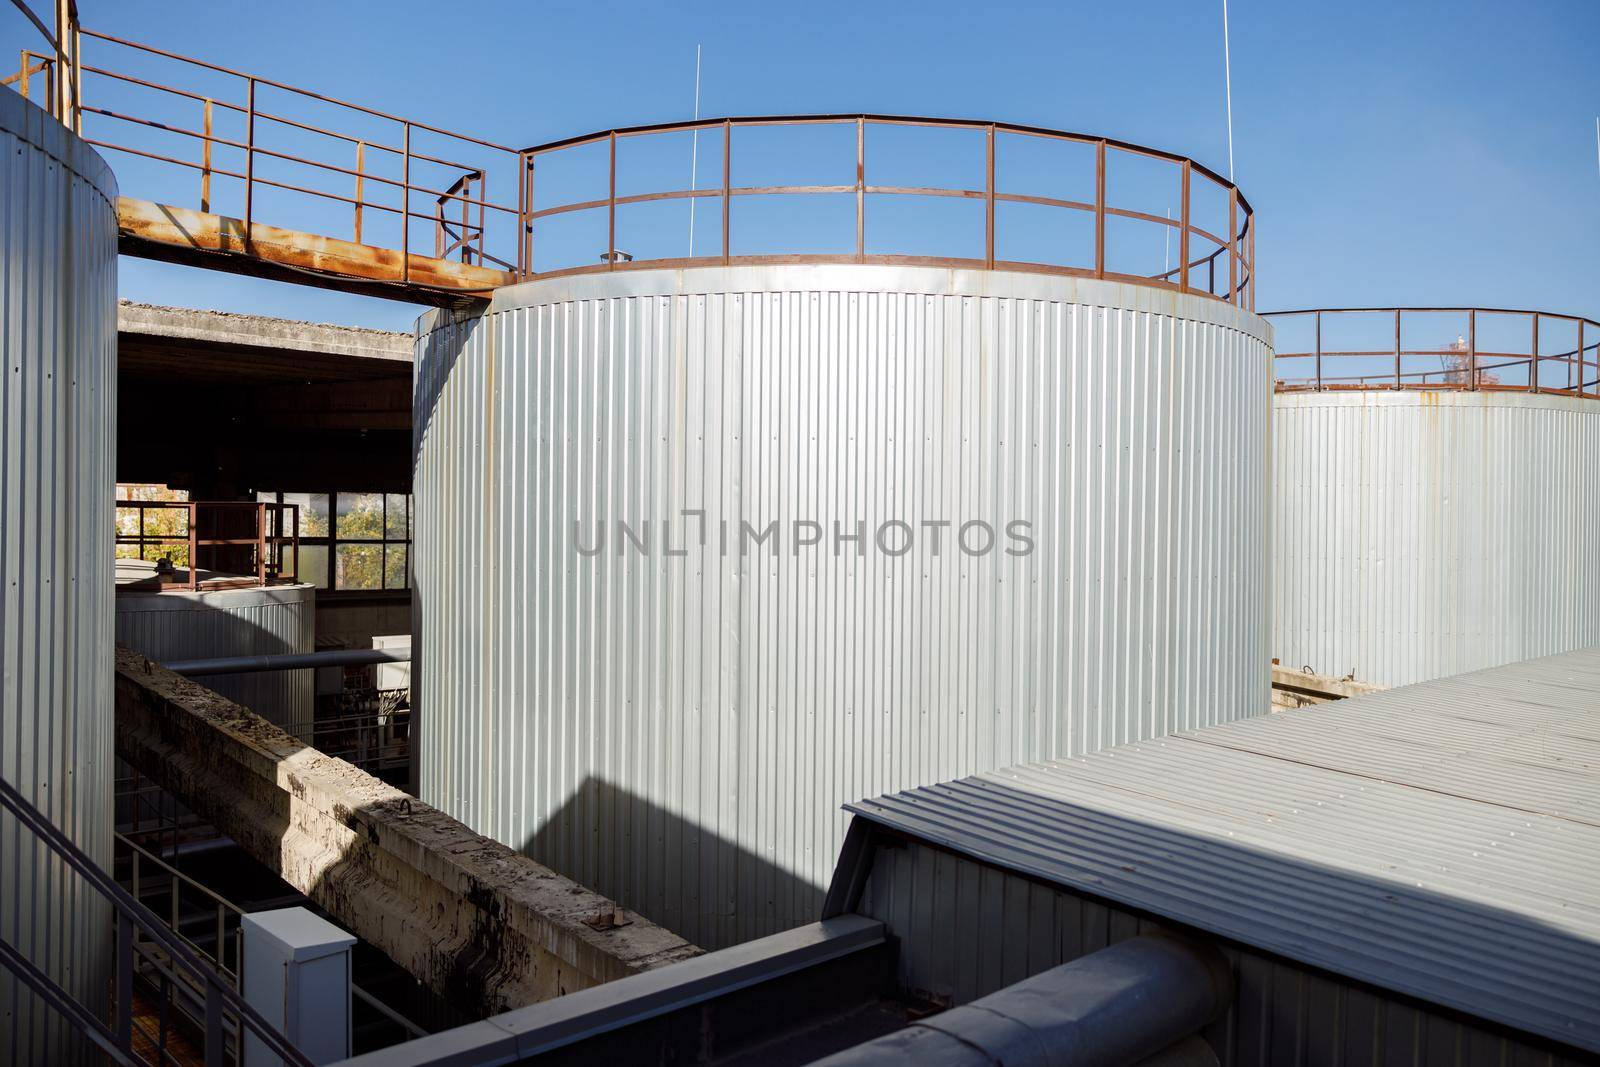 Huge steel storage containers outdoors at factory by Yaroslav_astakhov